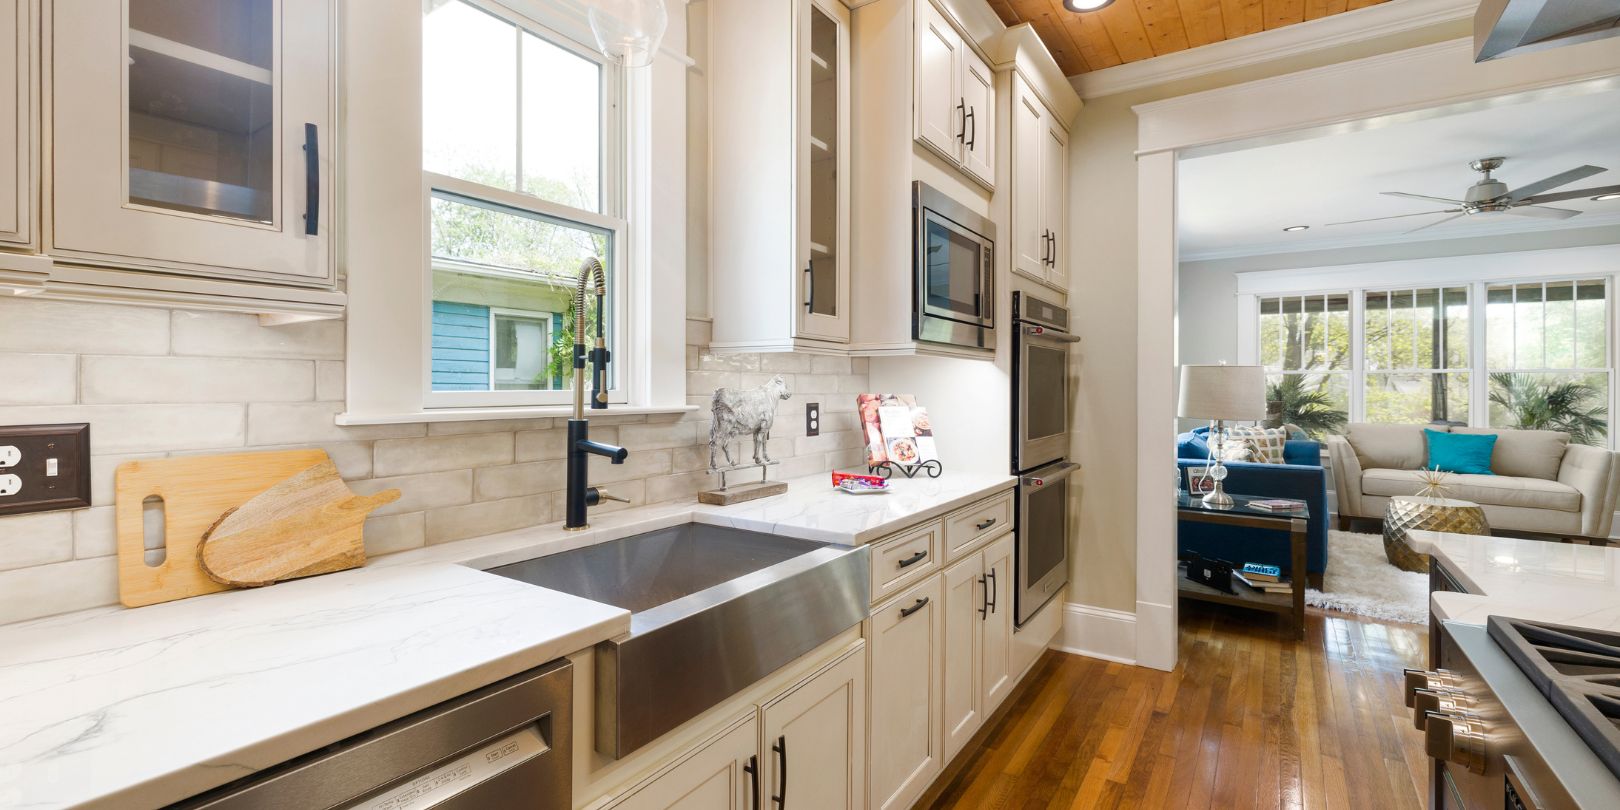 A White Kitchen Cabinets Inside the House